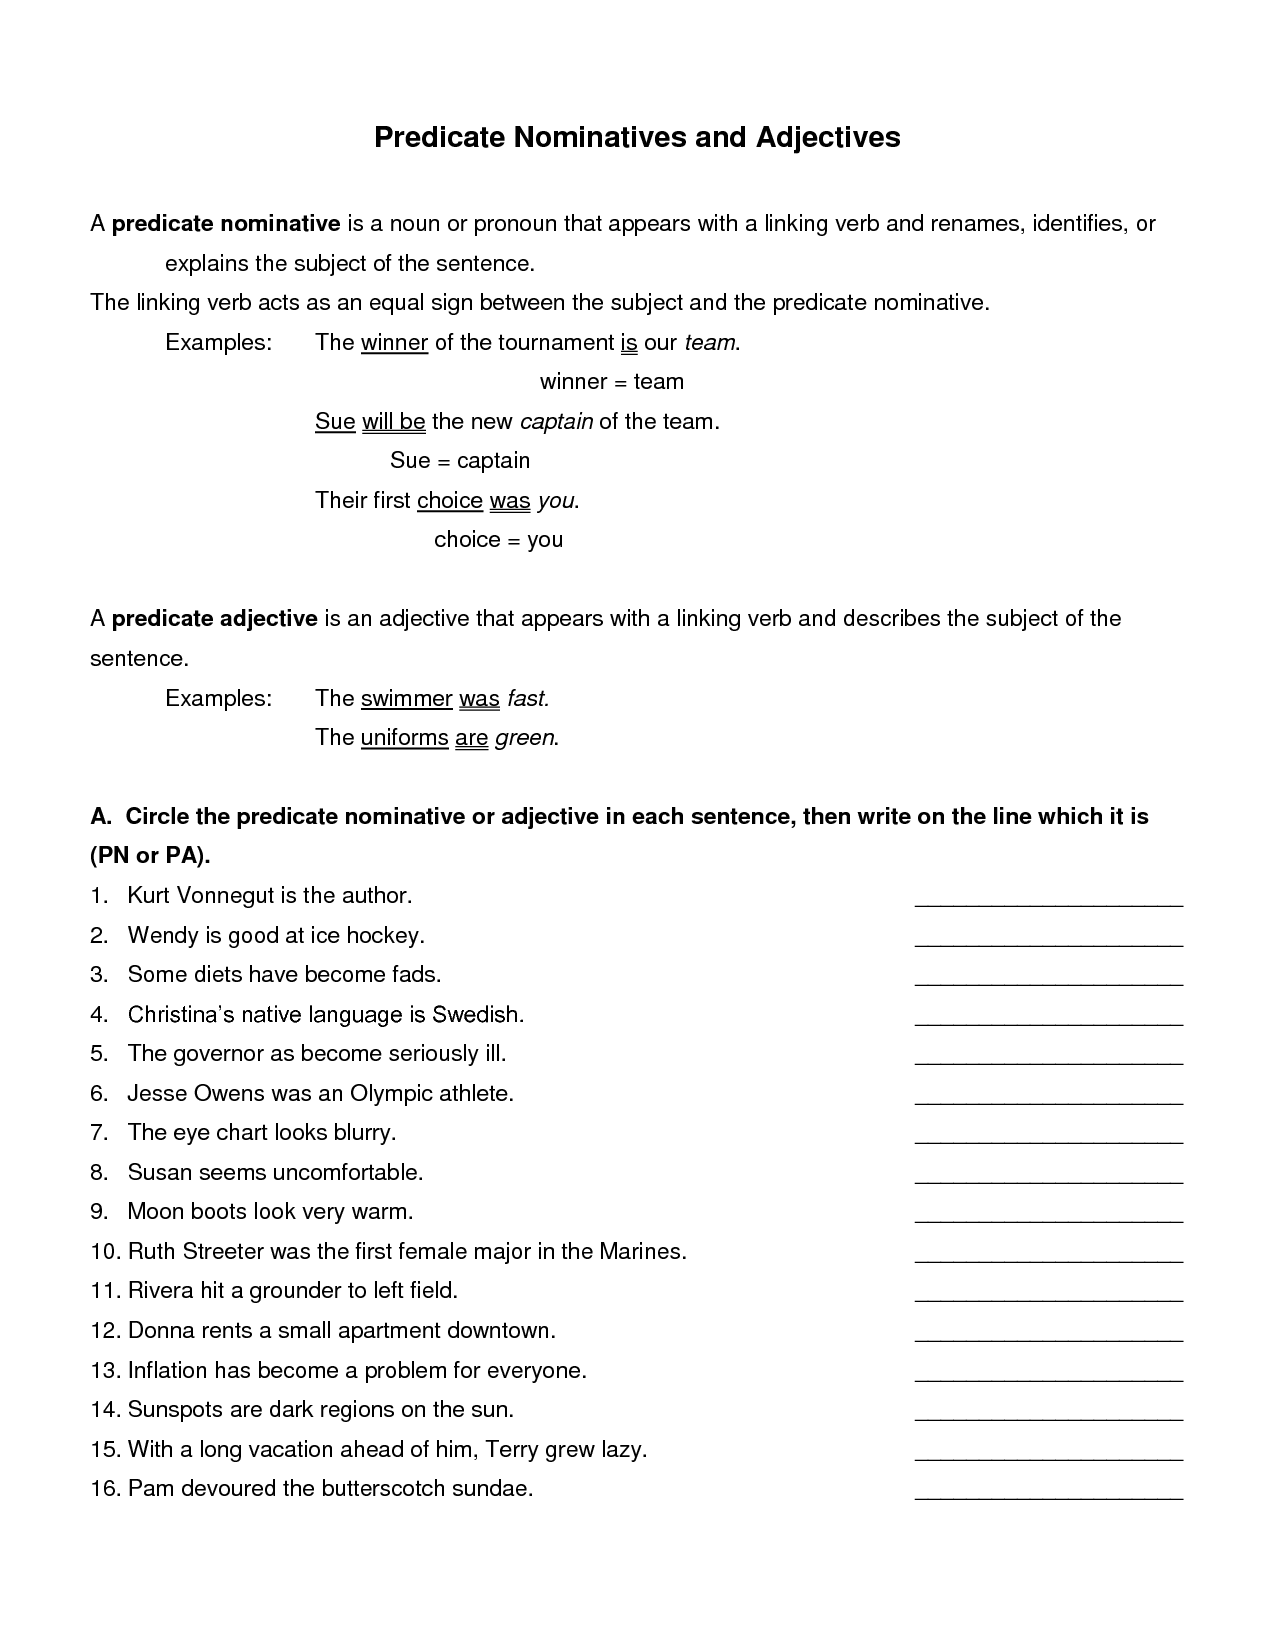 brilliant-ideas-of-predicate-nominative-and-predicate-adjective-free-worksheets-samples